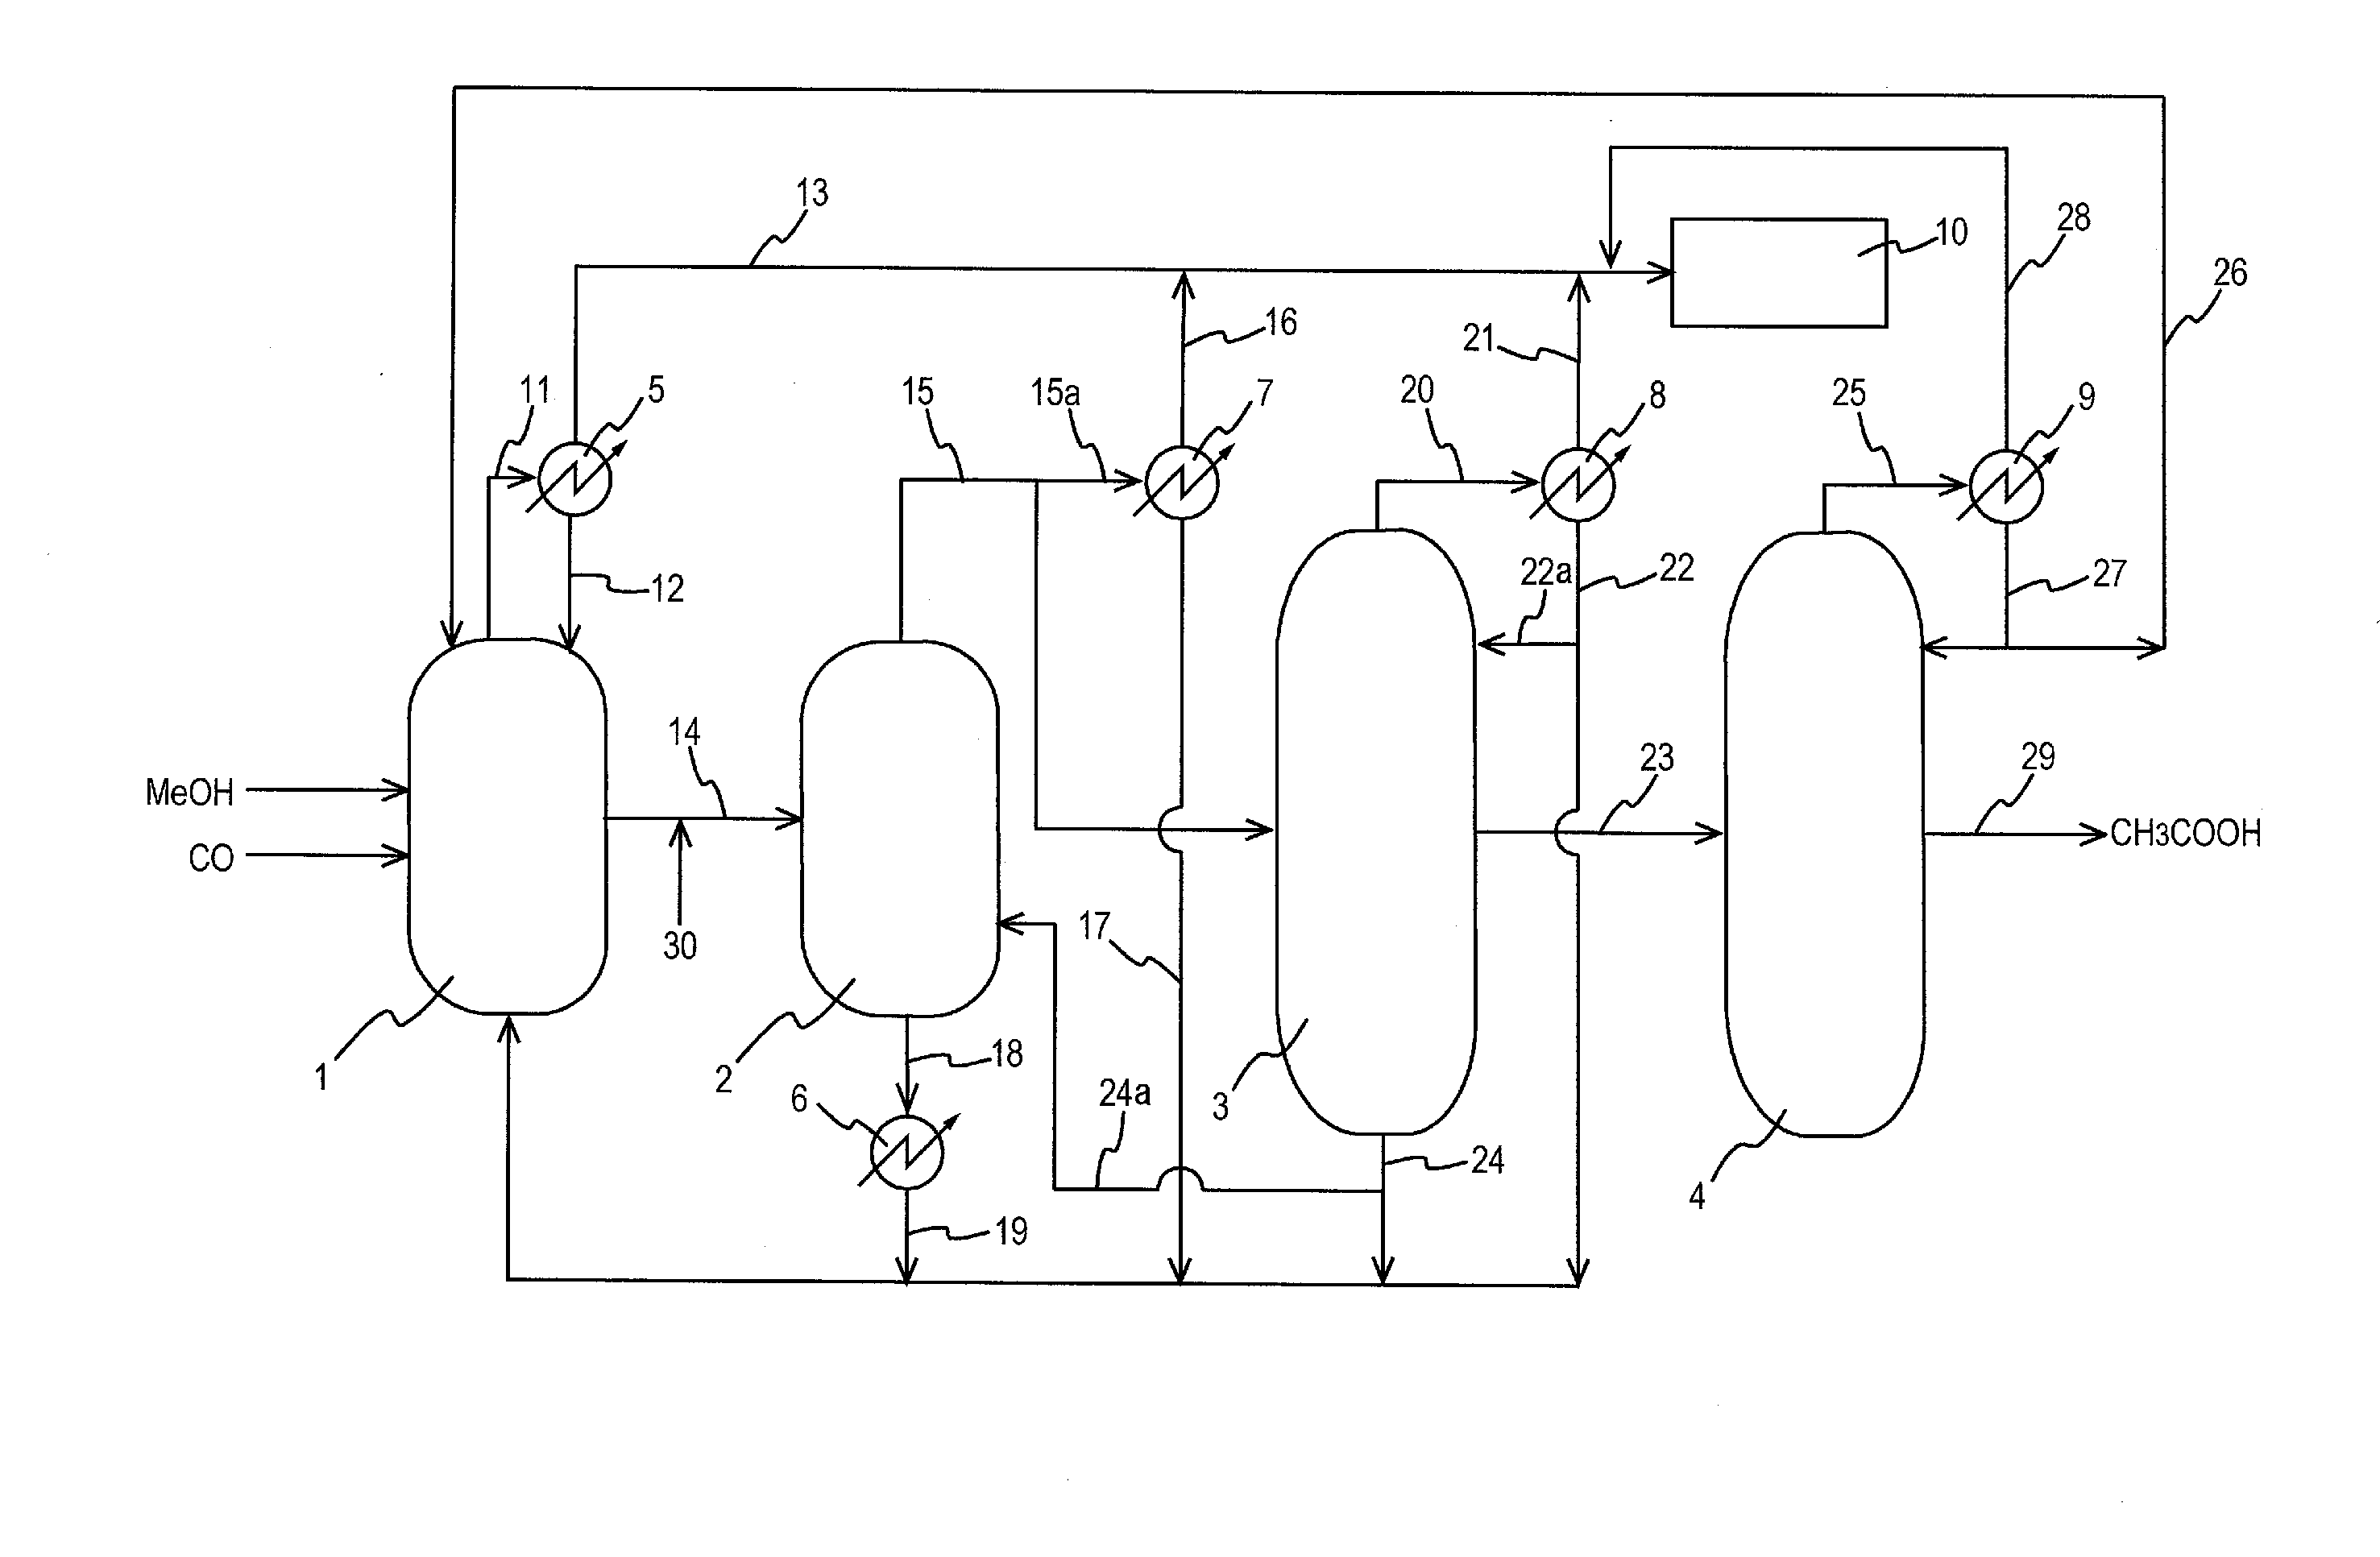 Process for producing acetic acid